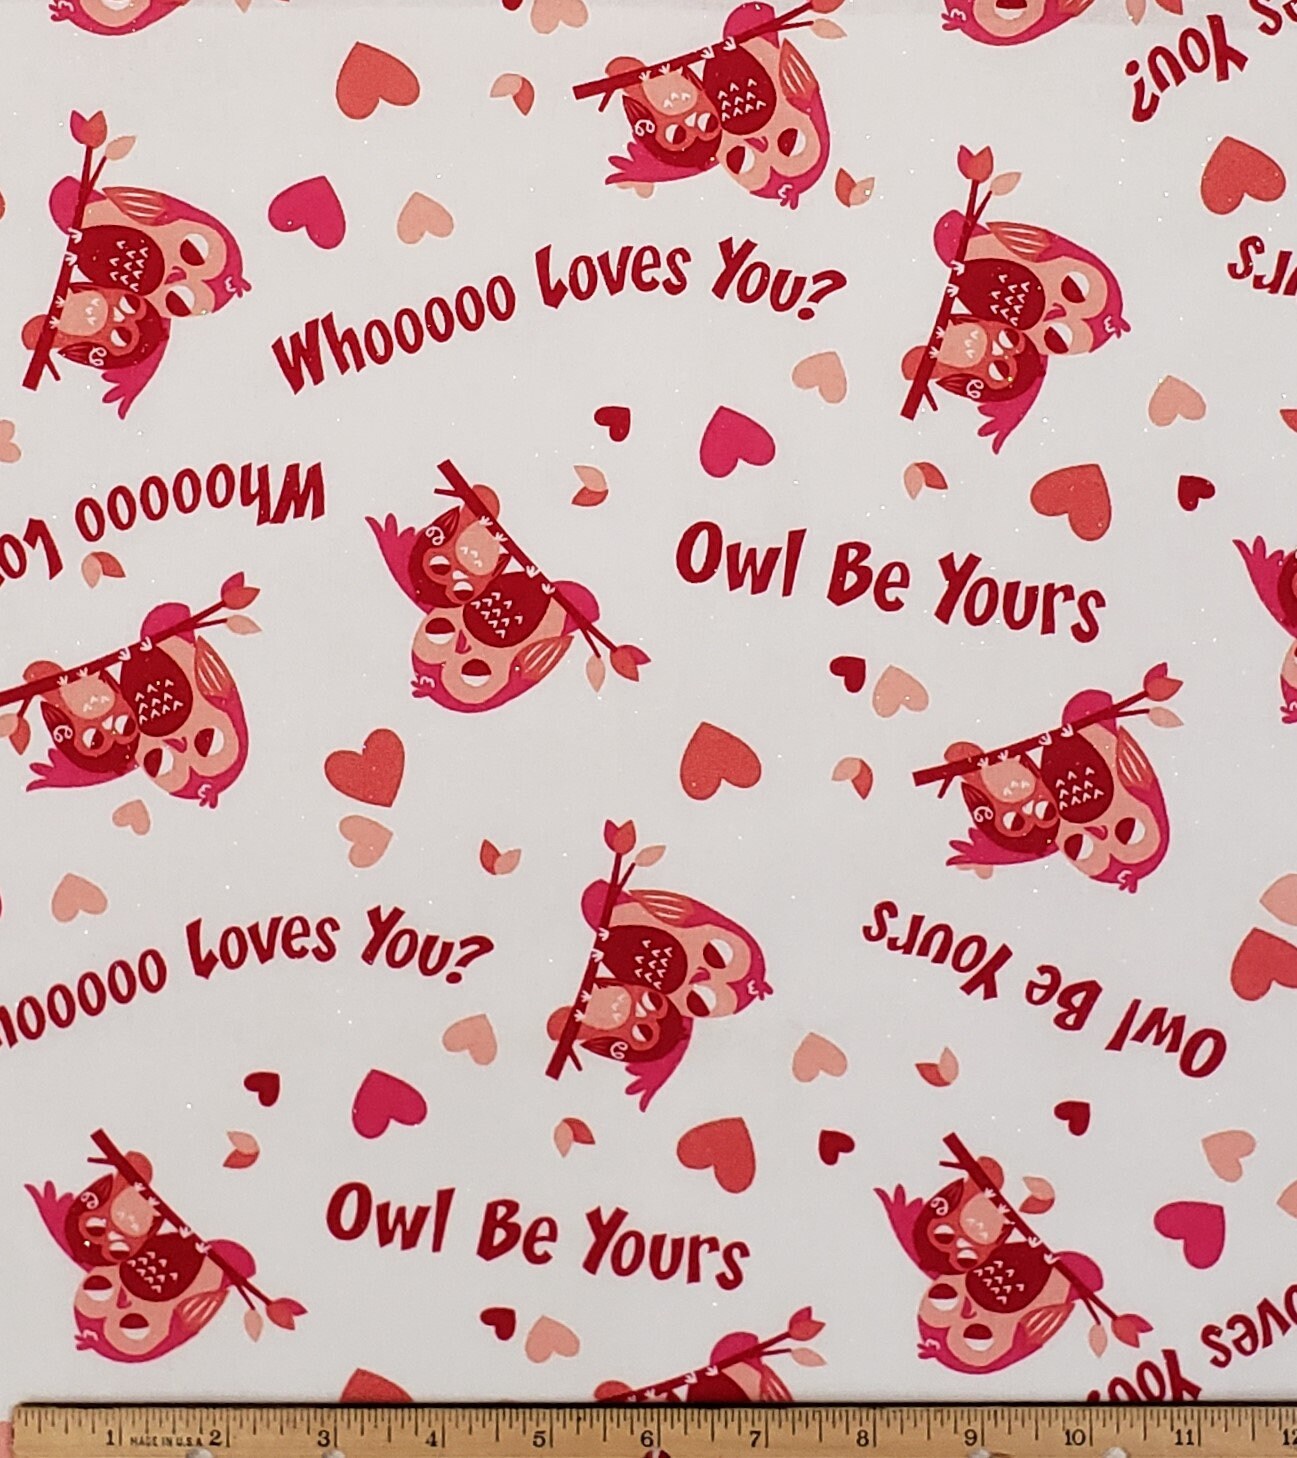 JoAnn Fabric & Craft - White Fabric with Whooooooo Loves You?, Red and Pink Own Print / Glitter Accents